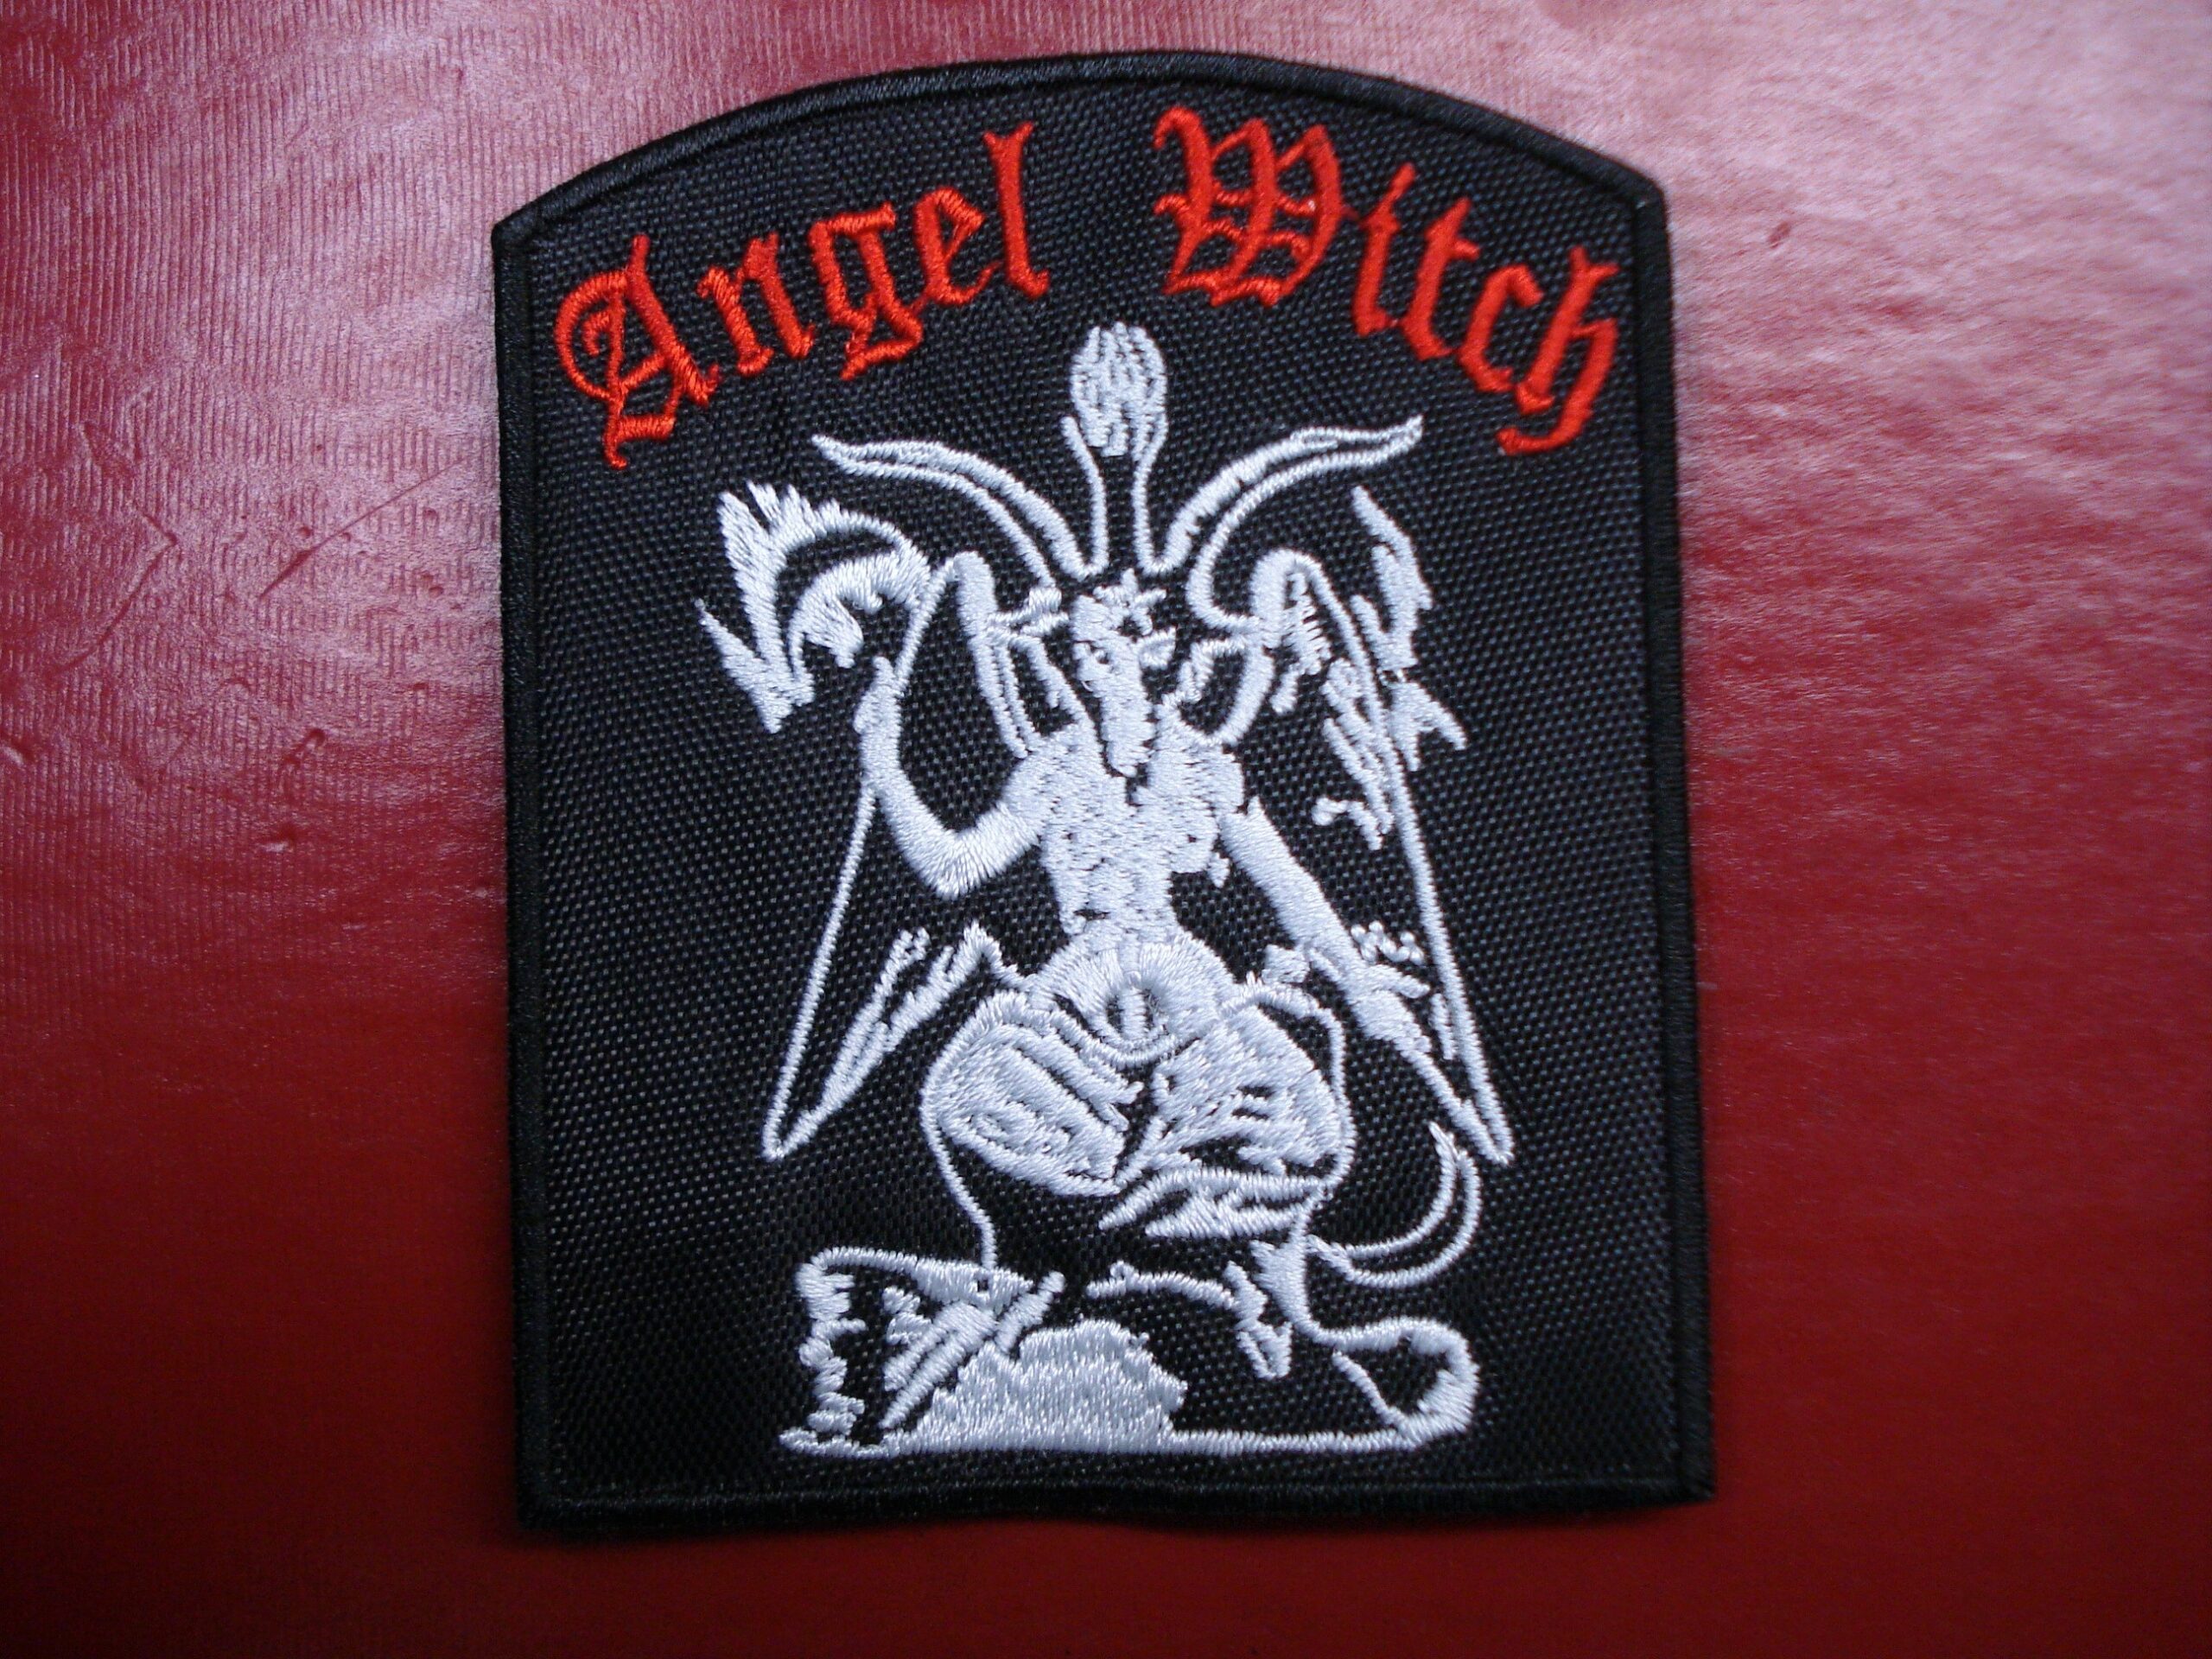 ANGEL WITCH Embroidered Patch (nwobhm) U.K 724